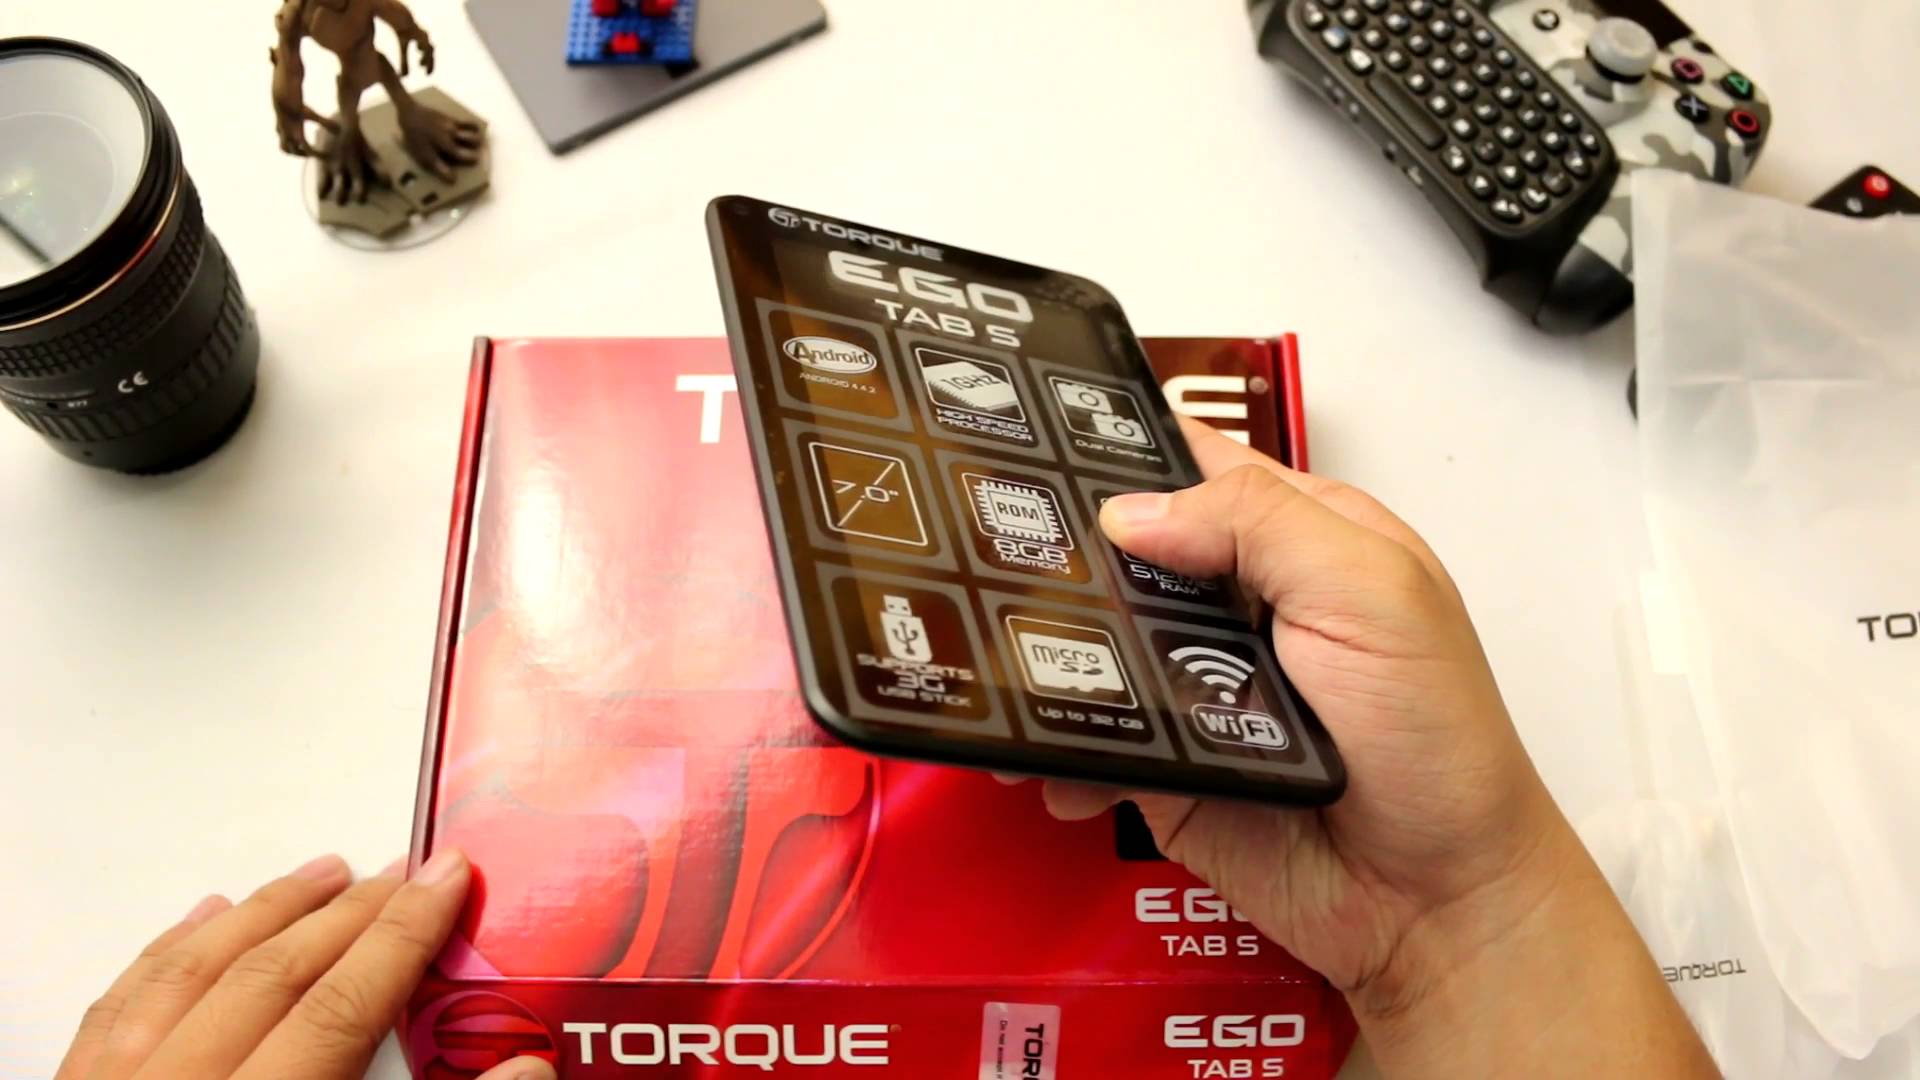 Torque Ego Tab S Unboxing and First Impressions